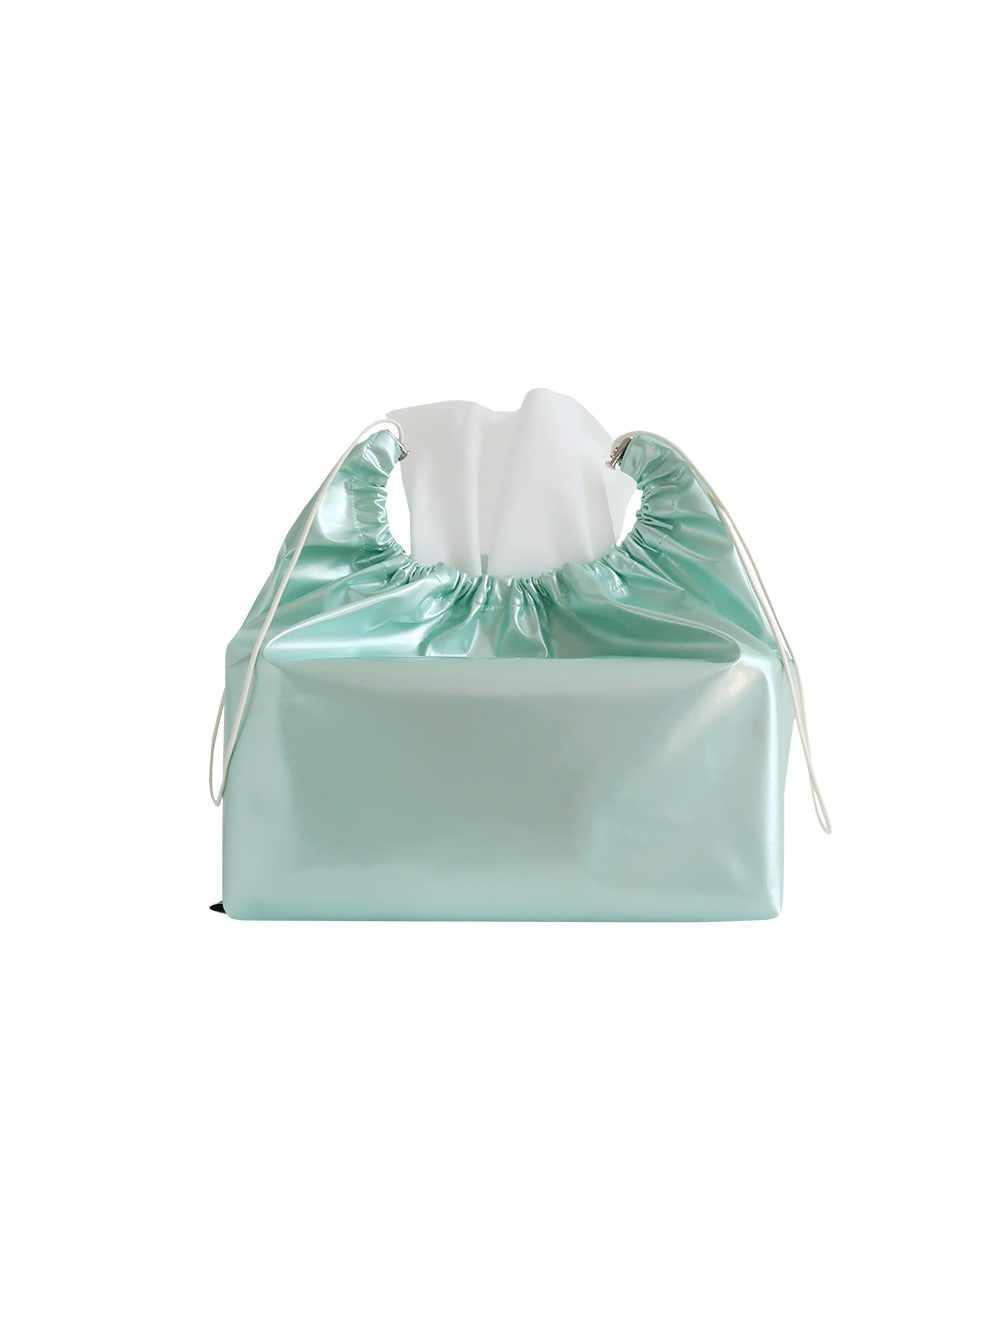 MELL TISSUE COVER (MINT)